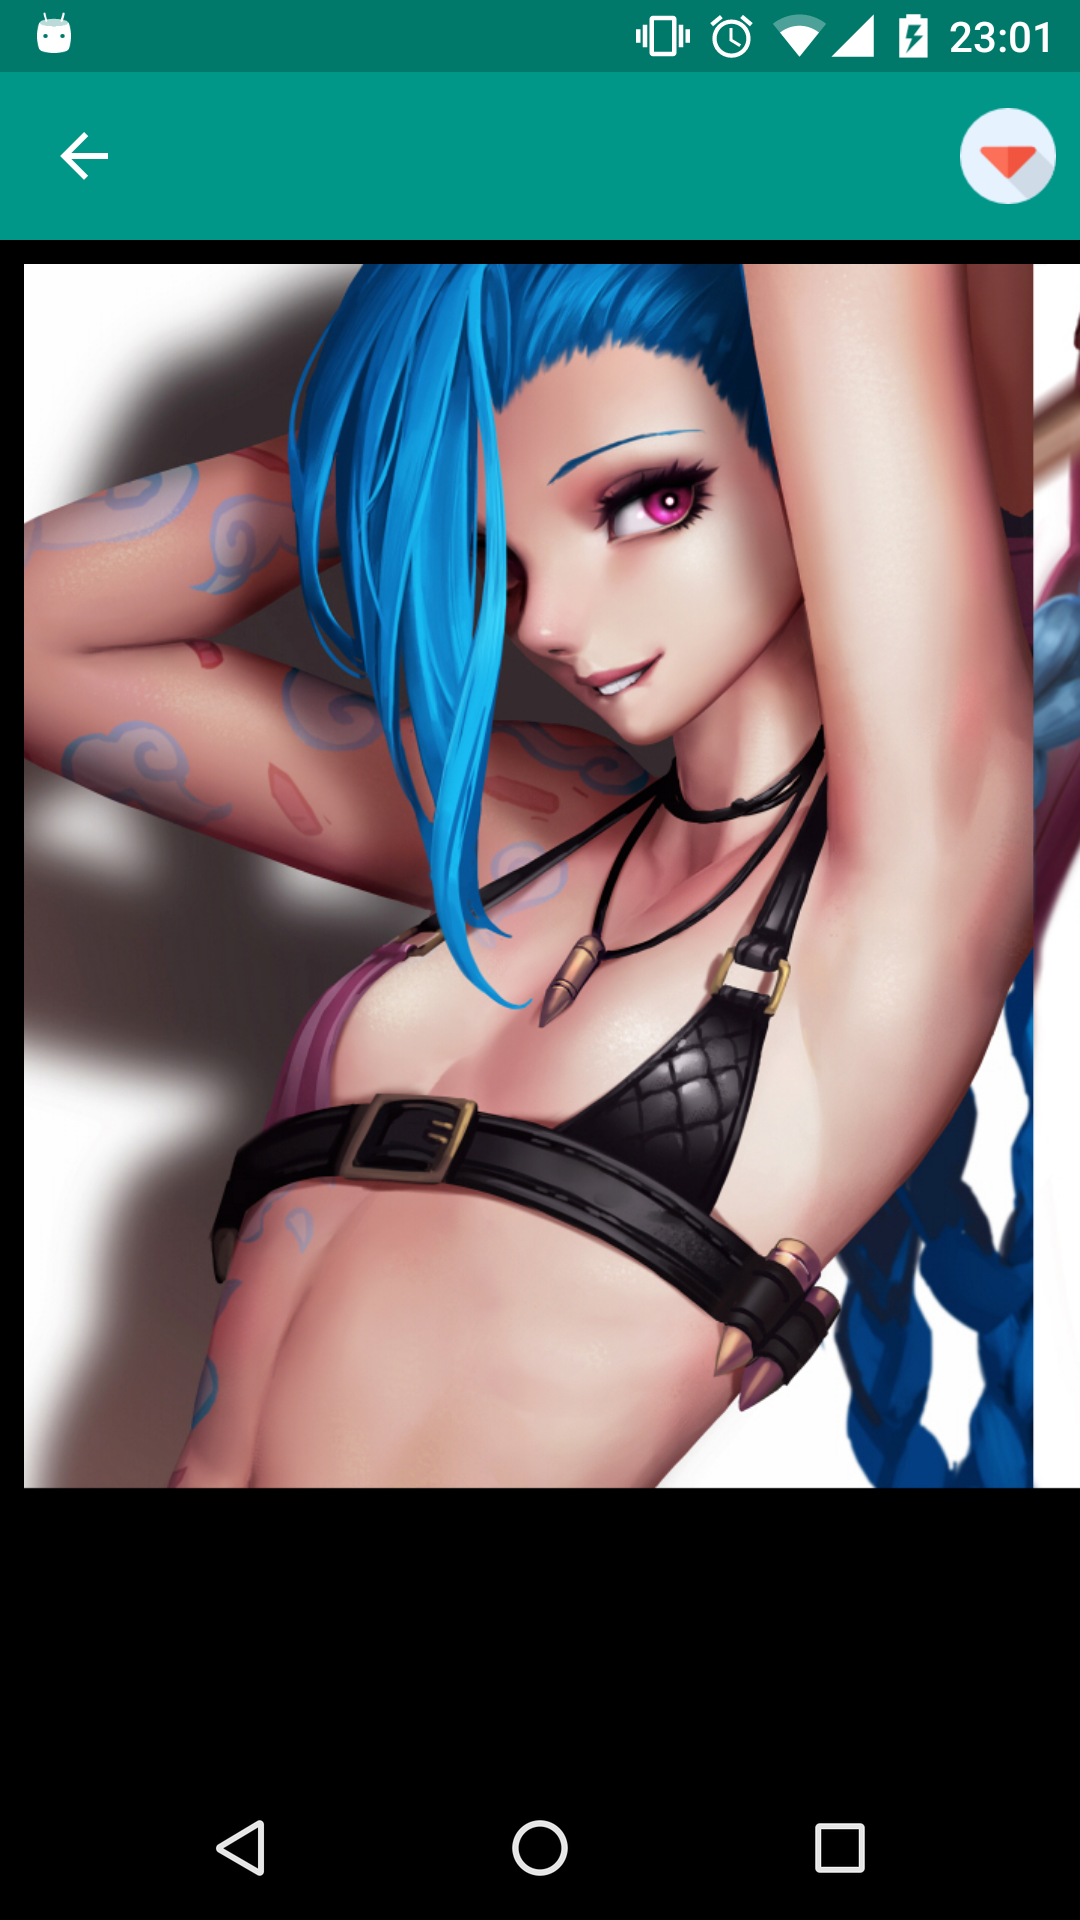 League of Legends wallpapers pictures,apk,wallpaper,puzzle,henti,app,for,backgrounds,wallpapers,lily,erotica,picw,league,top,adult,game,download,hentai,phone,legends,sexy,apps,lane,porn,pics,hot